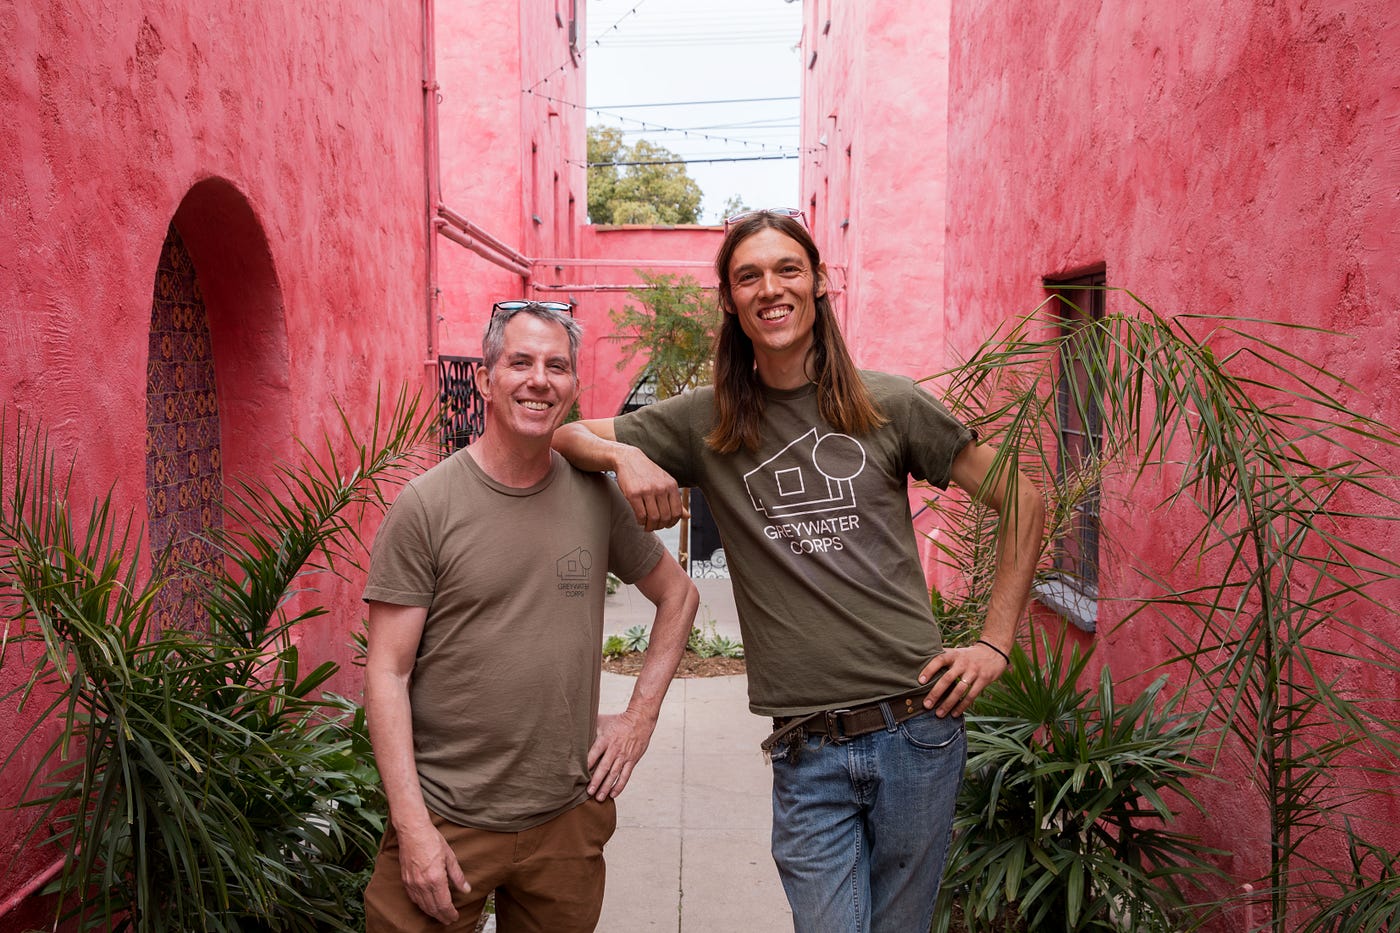 All about greywater with Leigh Jarrard of Greywater Corps, by Nico